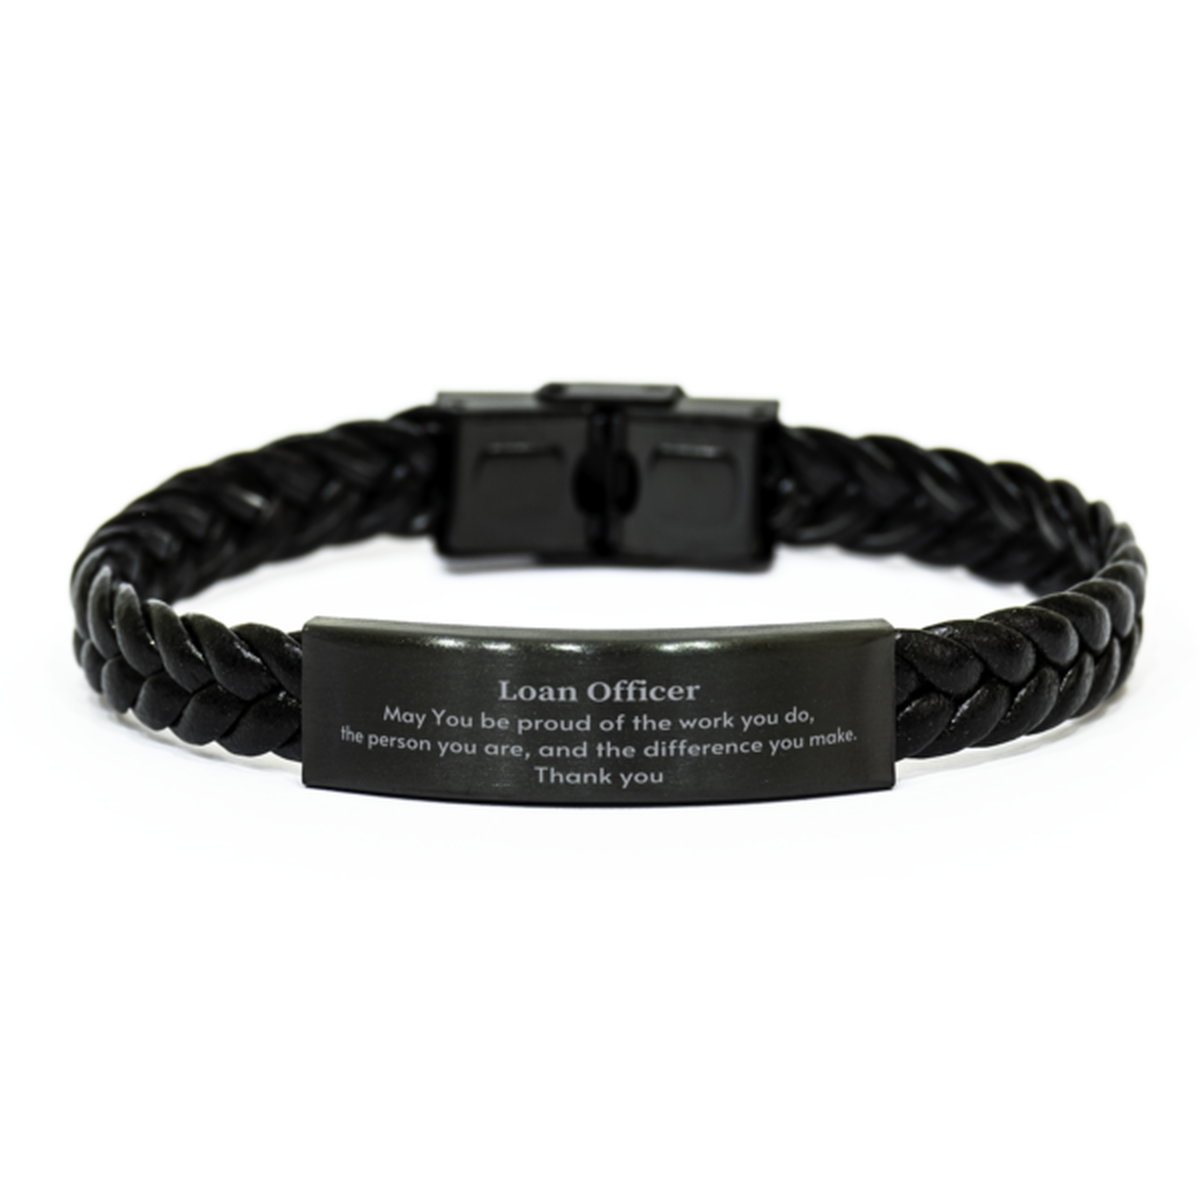 Heartwarming Braided Leather Bracelet Retirement Coworkers Gifts for Loan Officer, Loan Officer May You be proud of the work you do, the person you are Gifts for Boss Men Women Friends